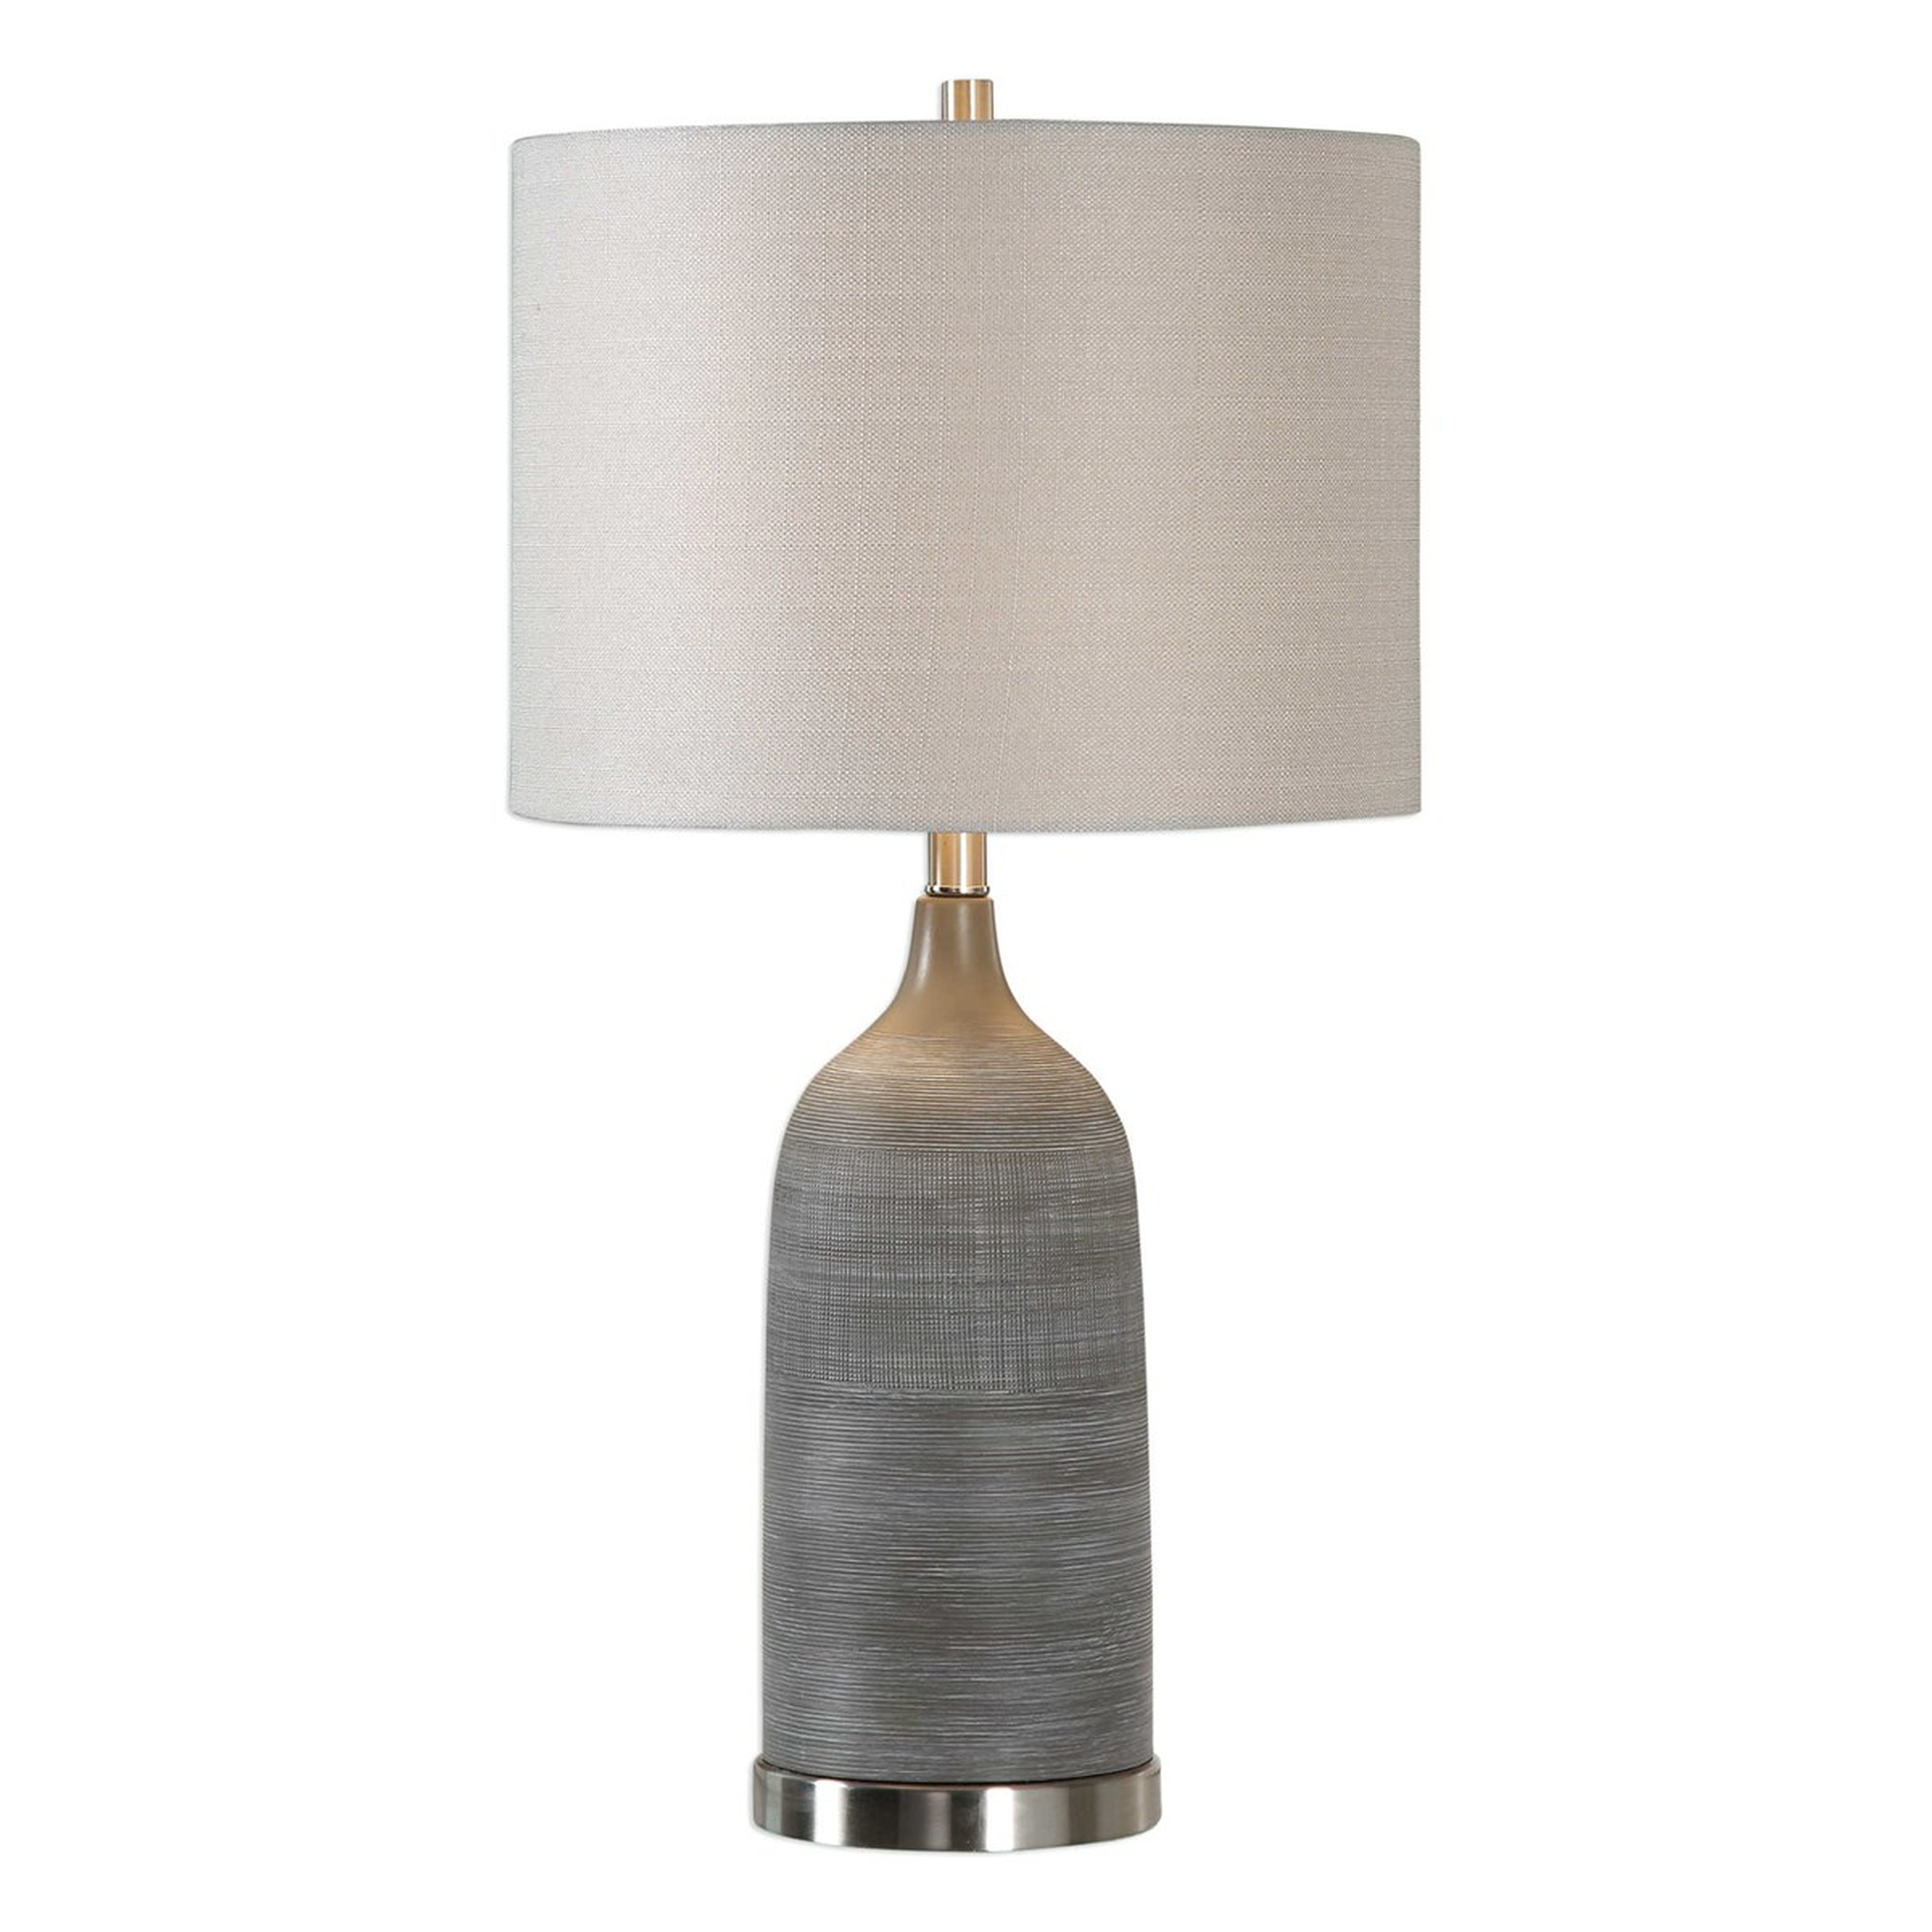 Olive Bronze Ceramic Table Lamp - Hudsonhill Foundry